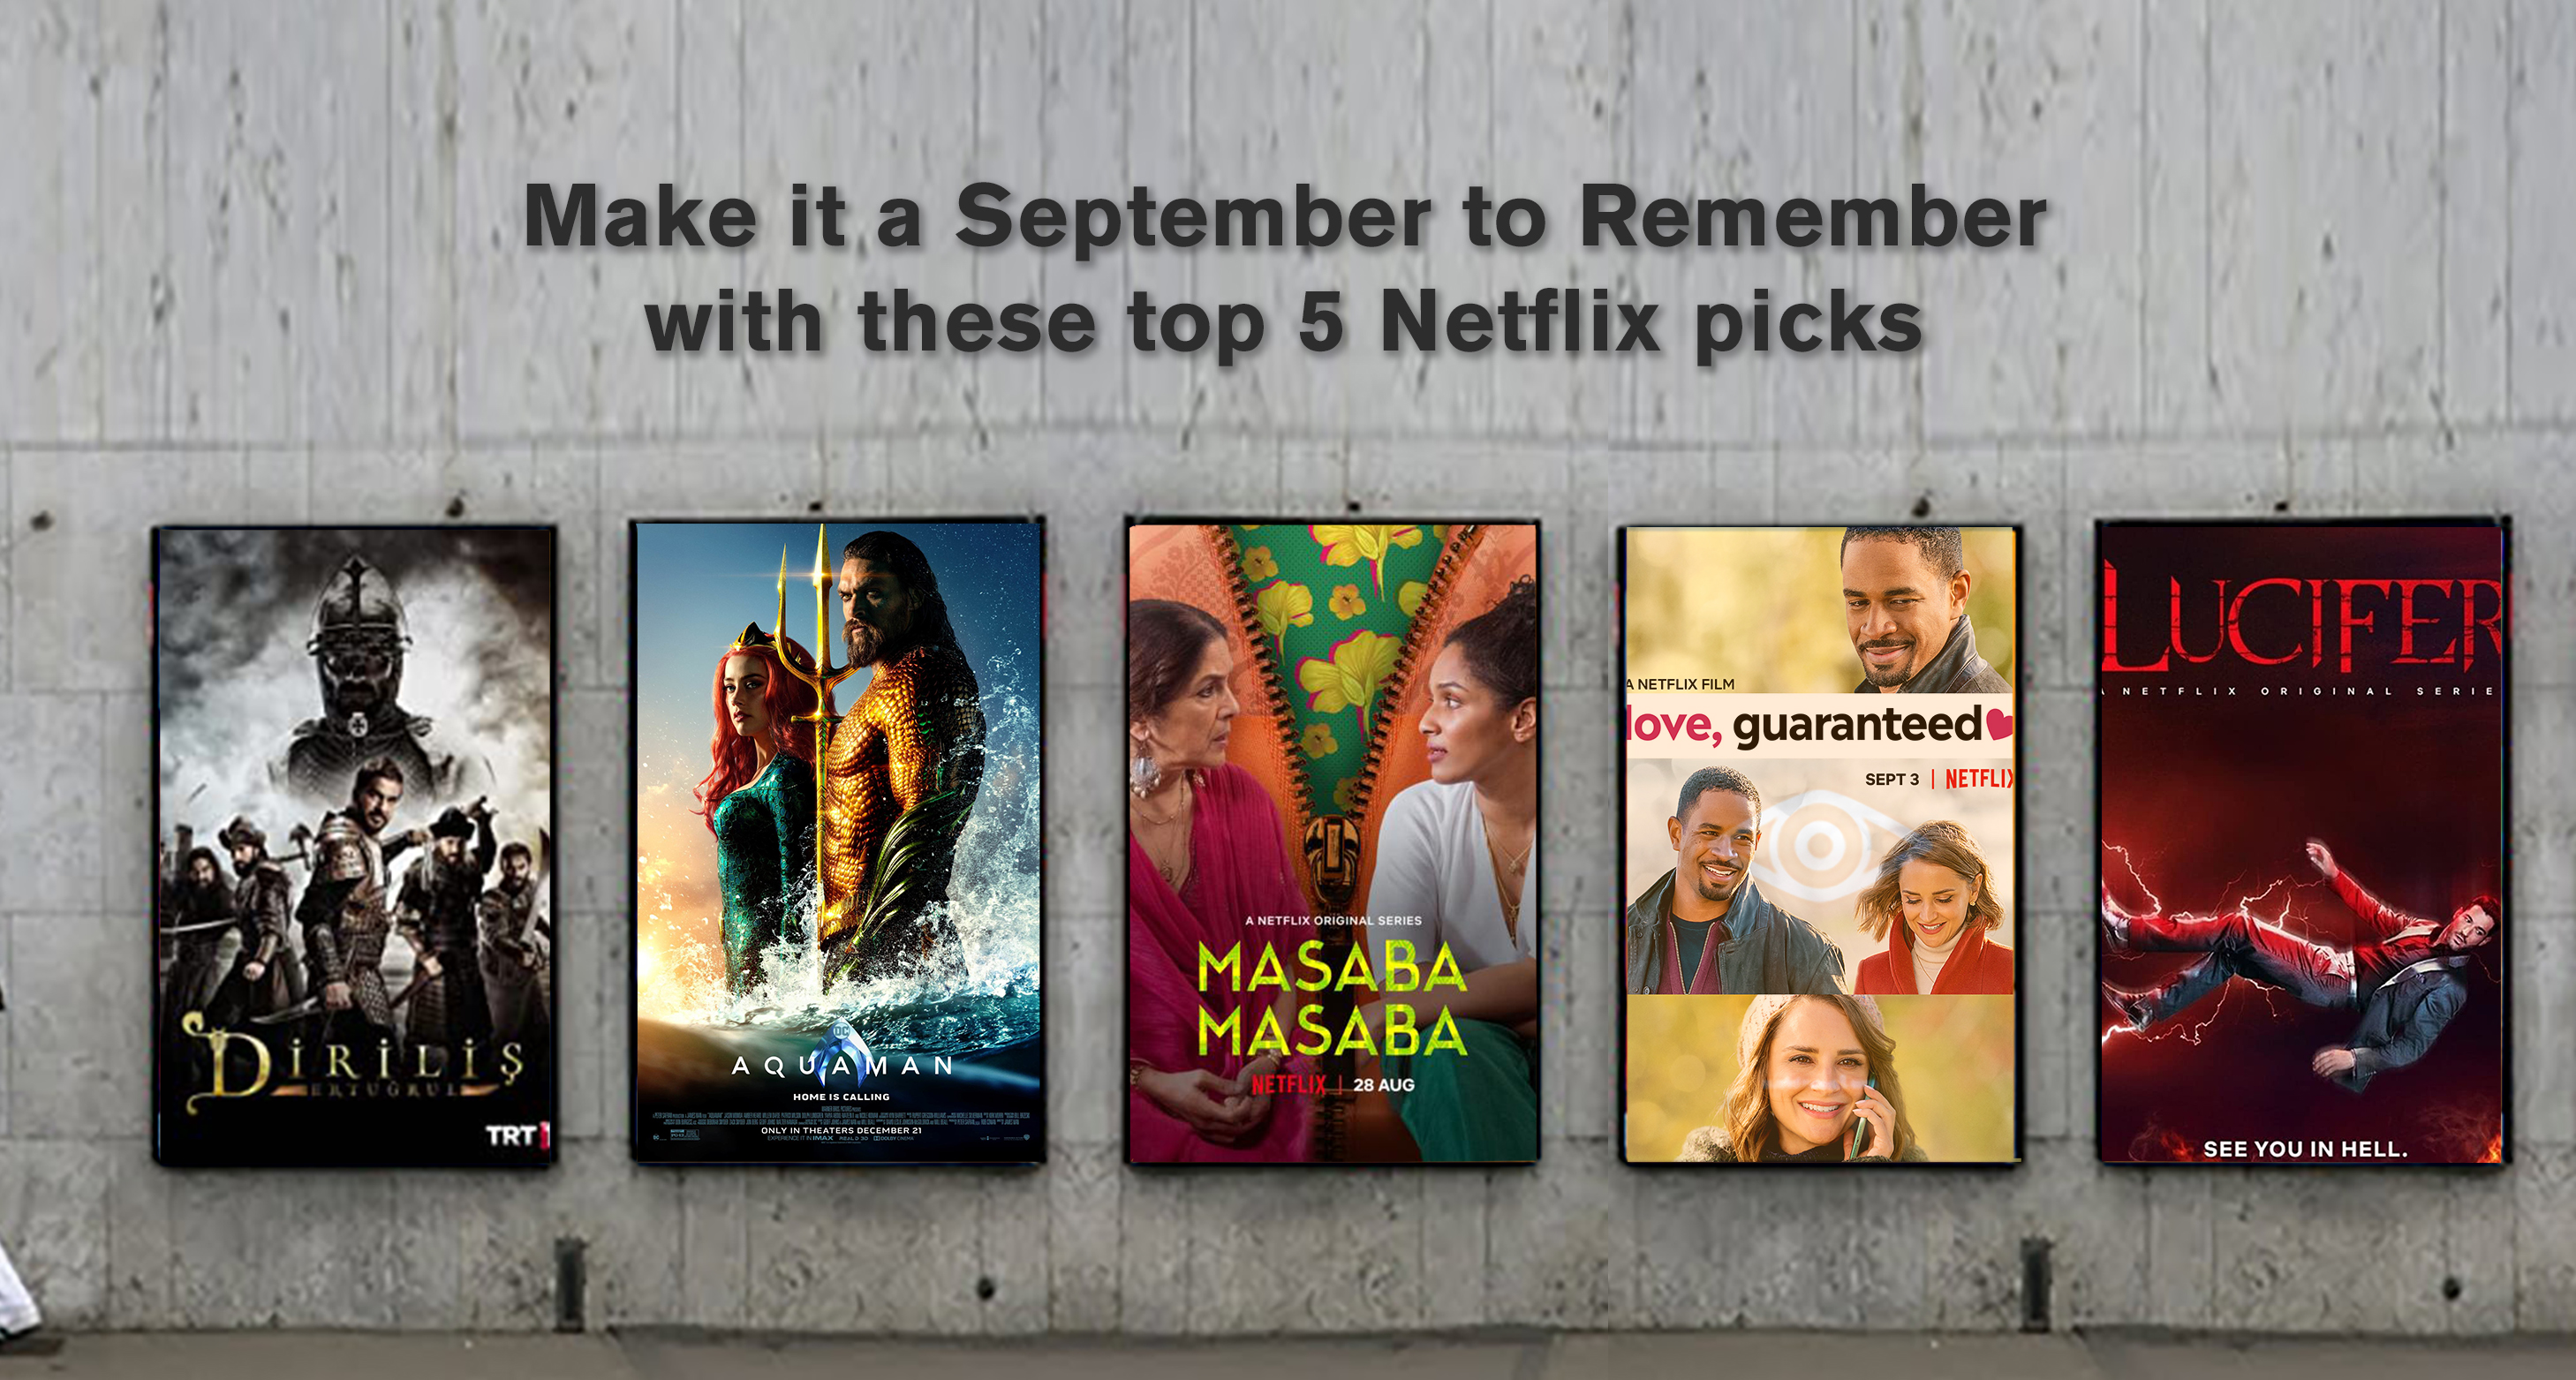 Make it a September to Remember with these top 5 Netflix picks